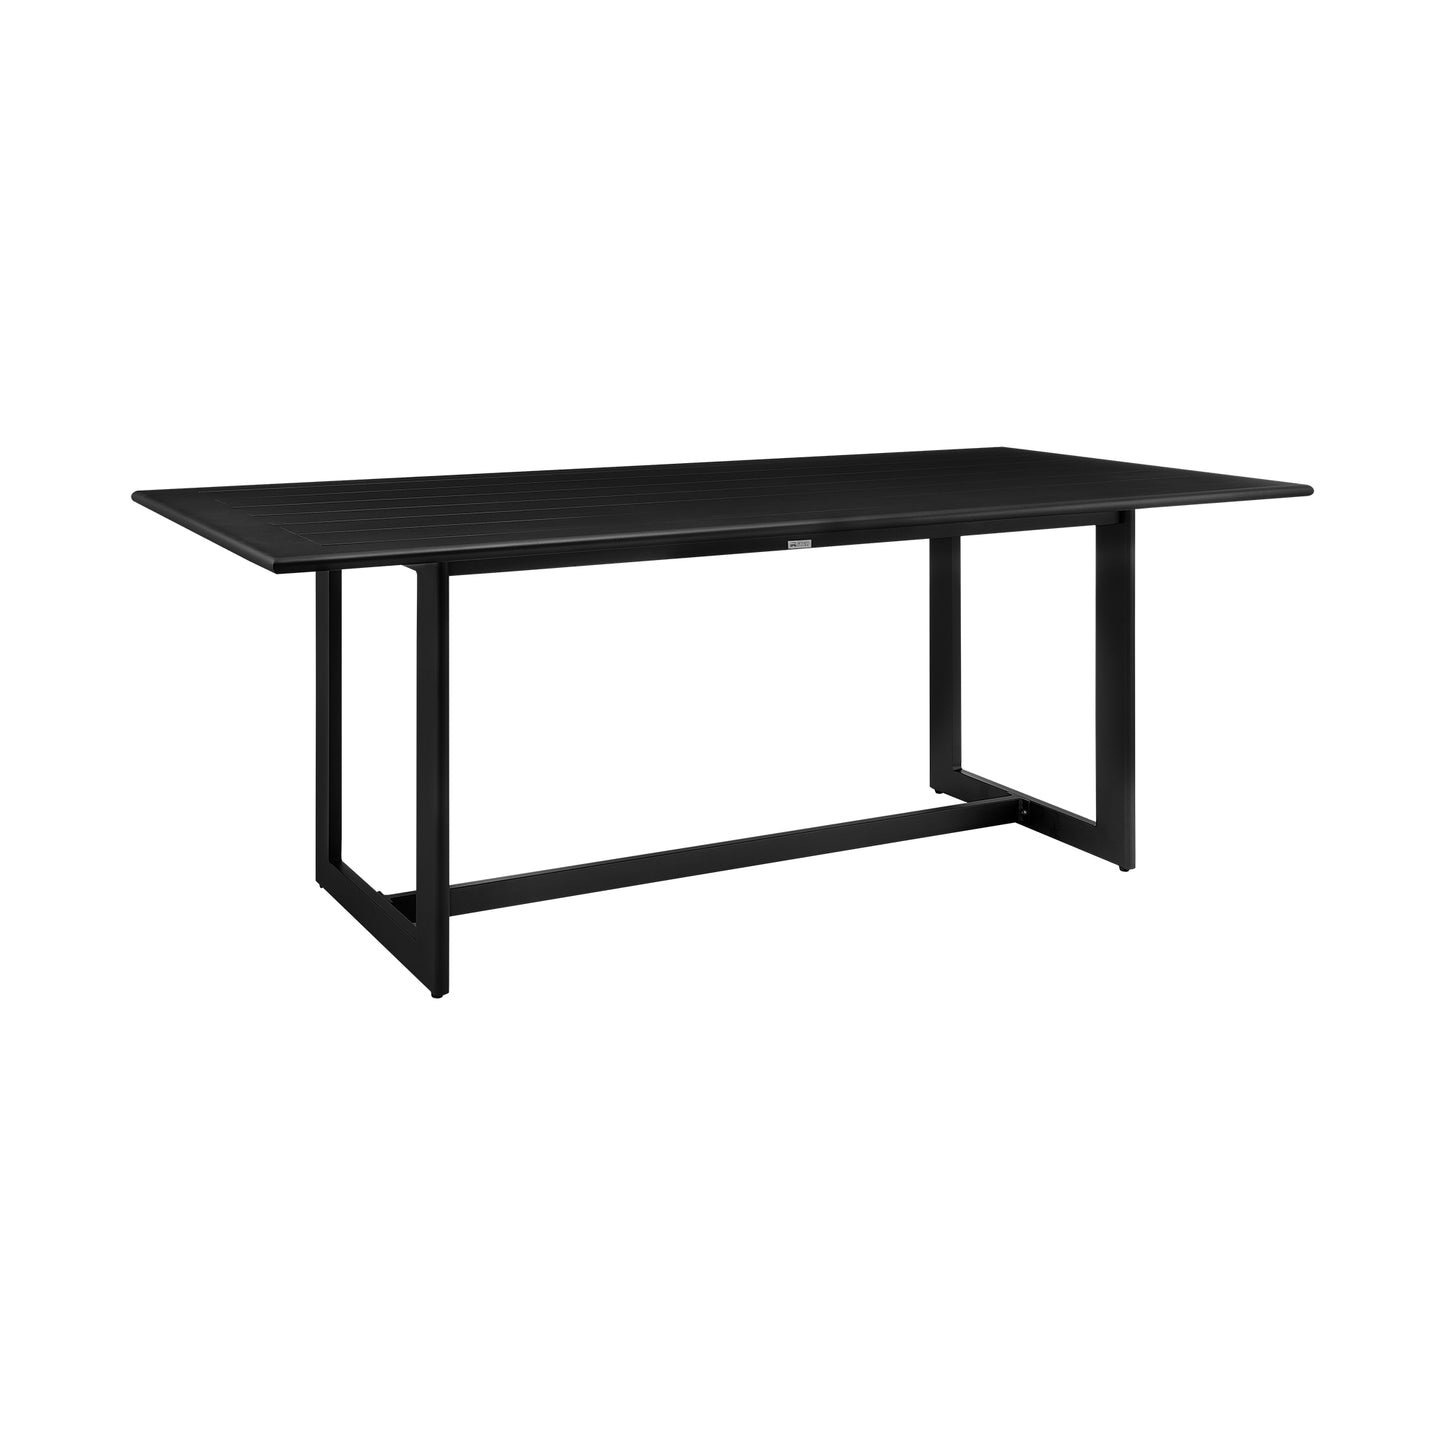 Cayman Outdoor Patio Dining Table in Aluminum